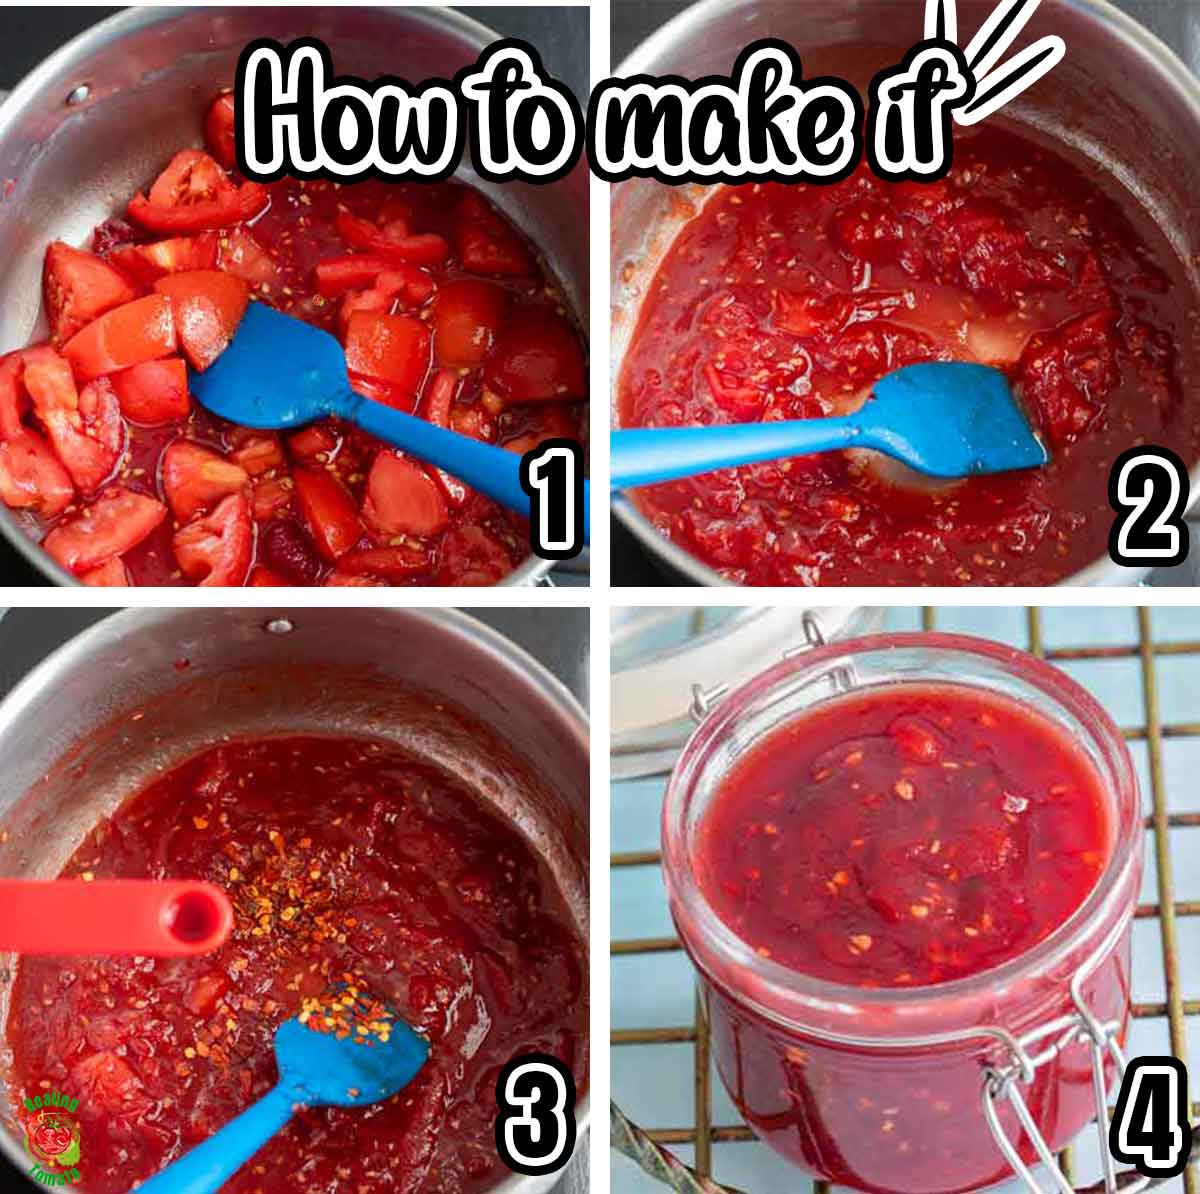 Collage of 4 steps to make the recipe. Each collage has a number corresponding to the step.